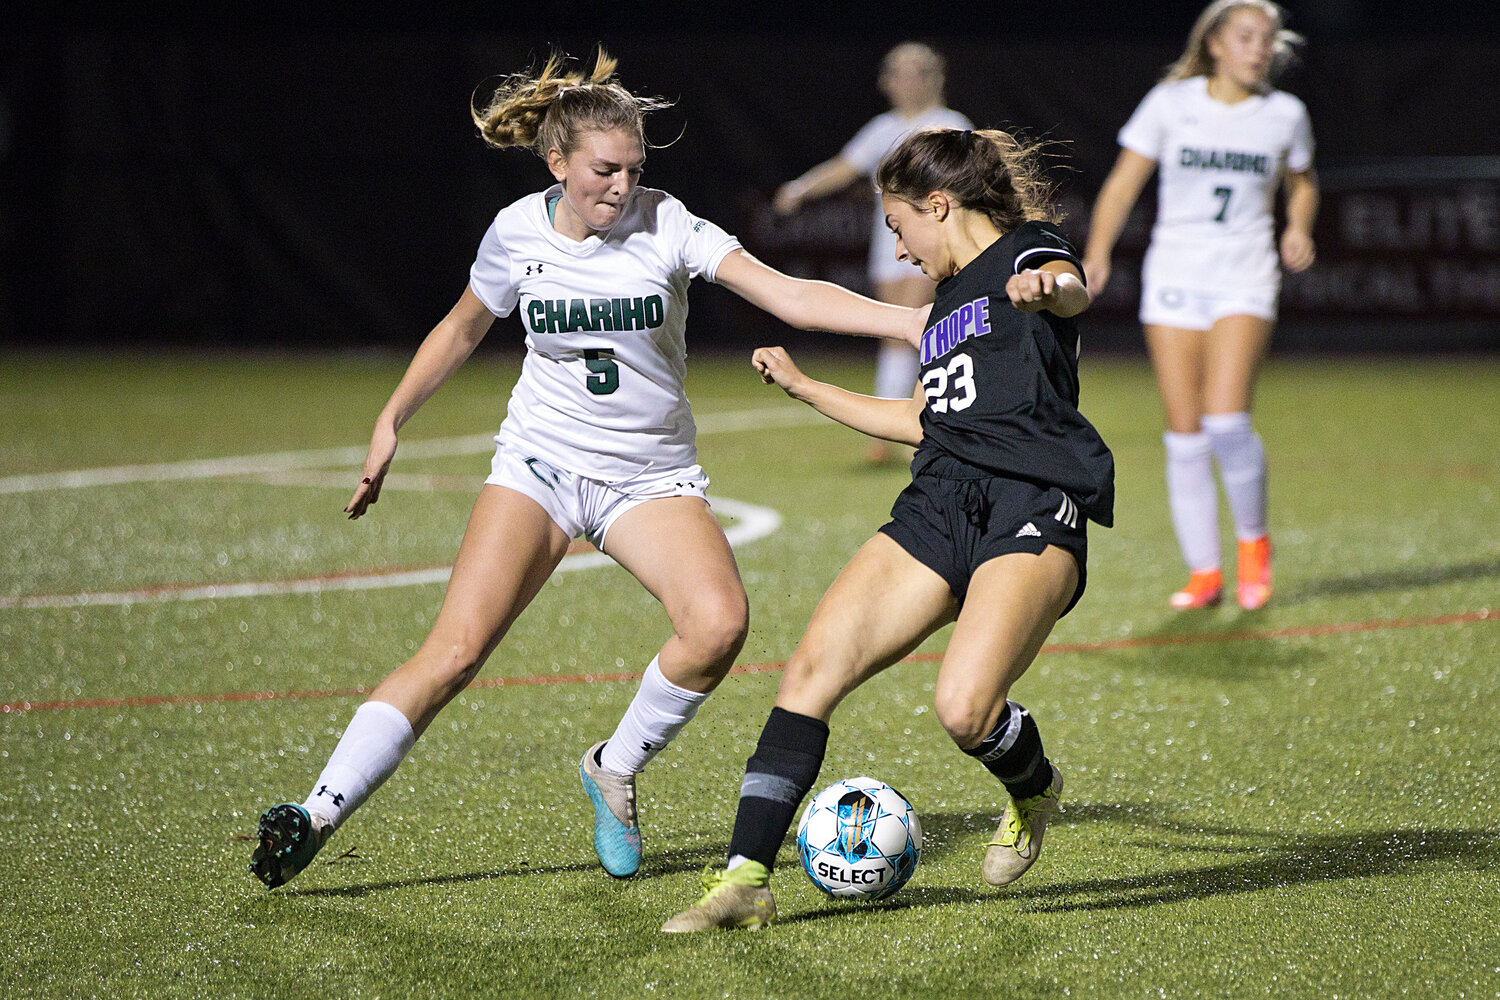 Hannah Rezendes maneuvers the ball away from a Chariho opponent.